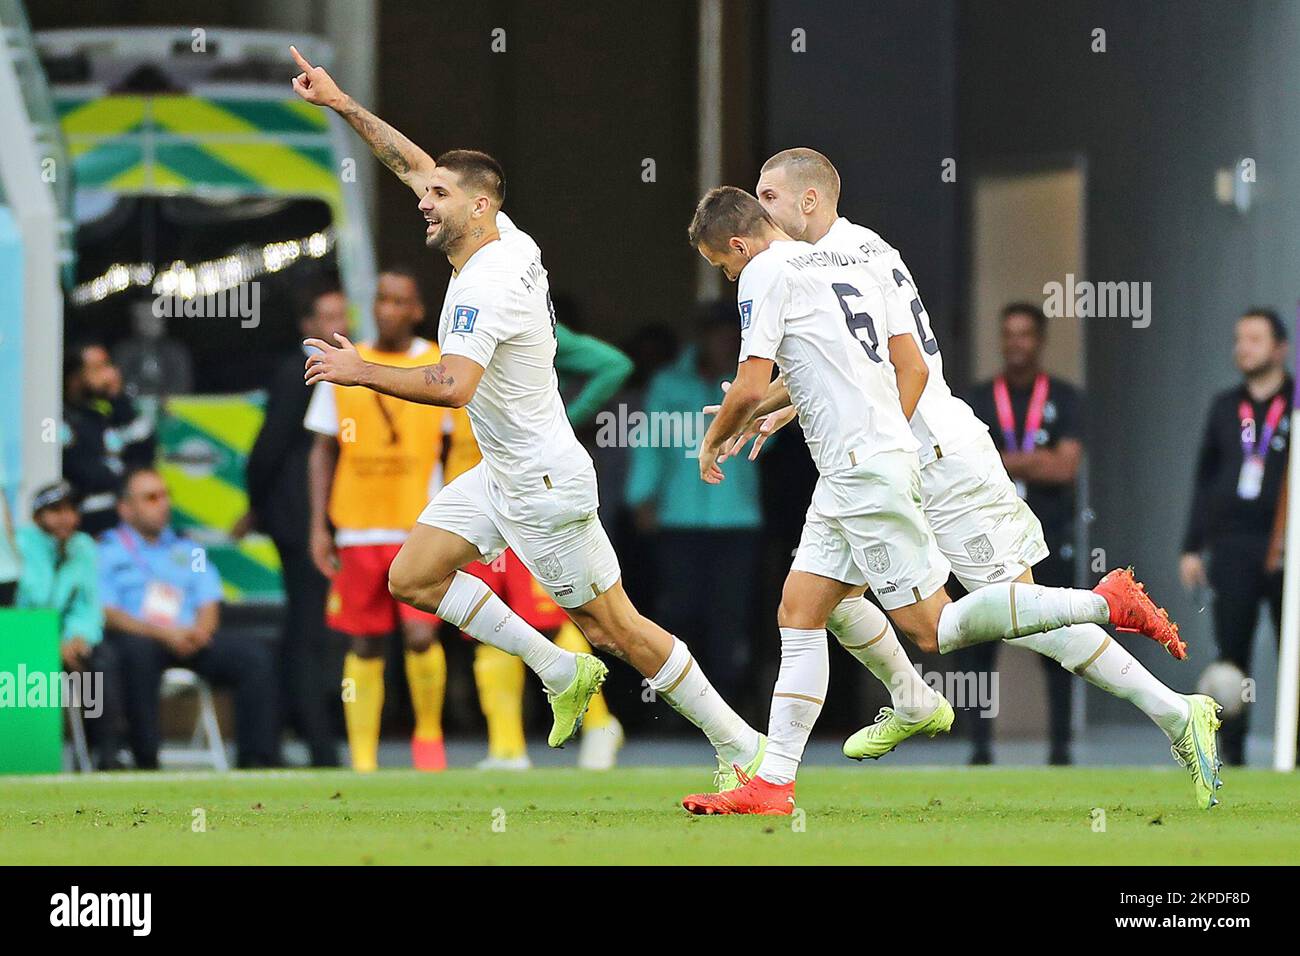 Doha, Qatar. 28th Nov, 2022. Aleksandar Mitrovic of Serbia, celebrates his goal during the match between Cameroon and Serbia, for the 2nd round of Group G of the FIFA World Cup Qatar 2022, Al Janoub Stadium this Monday 28. 30761 (Heuler Andrey/SPP) Credit: SPP Sport Press Photo. /Alamy Live News Stock Photo